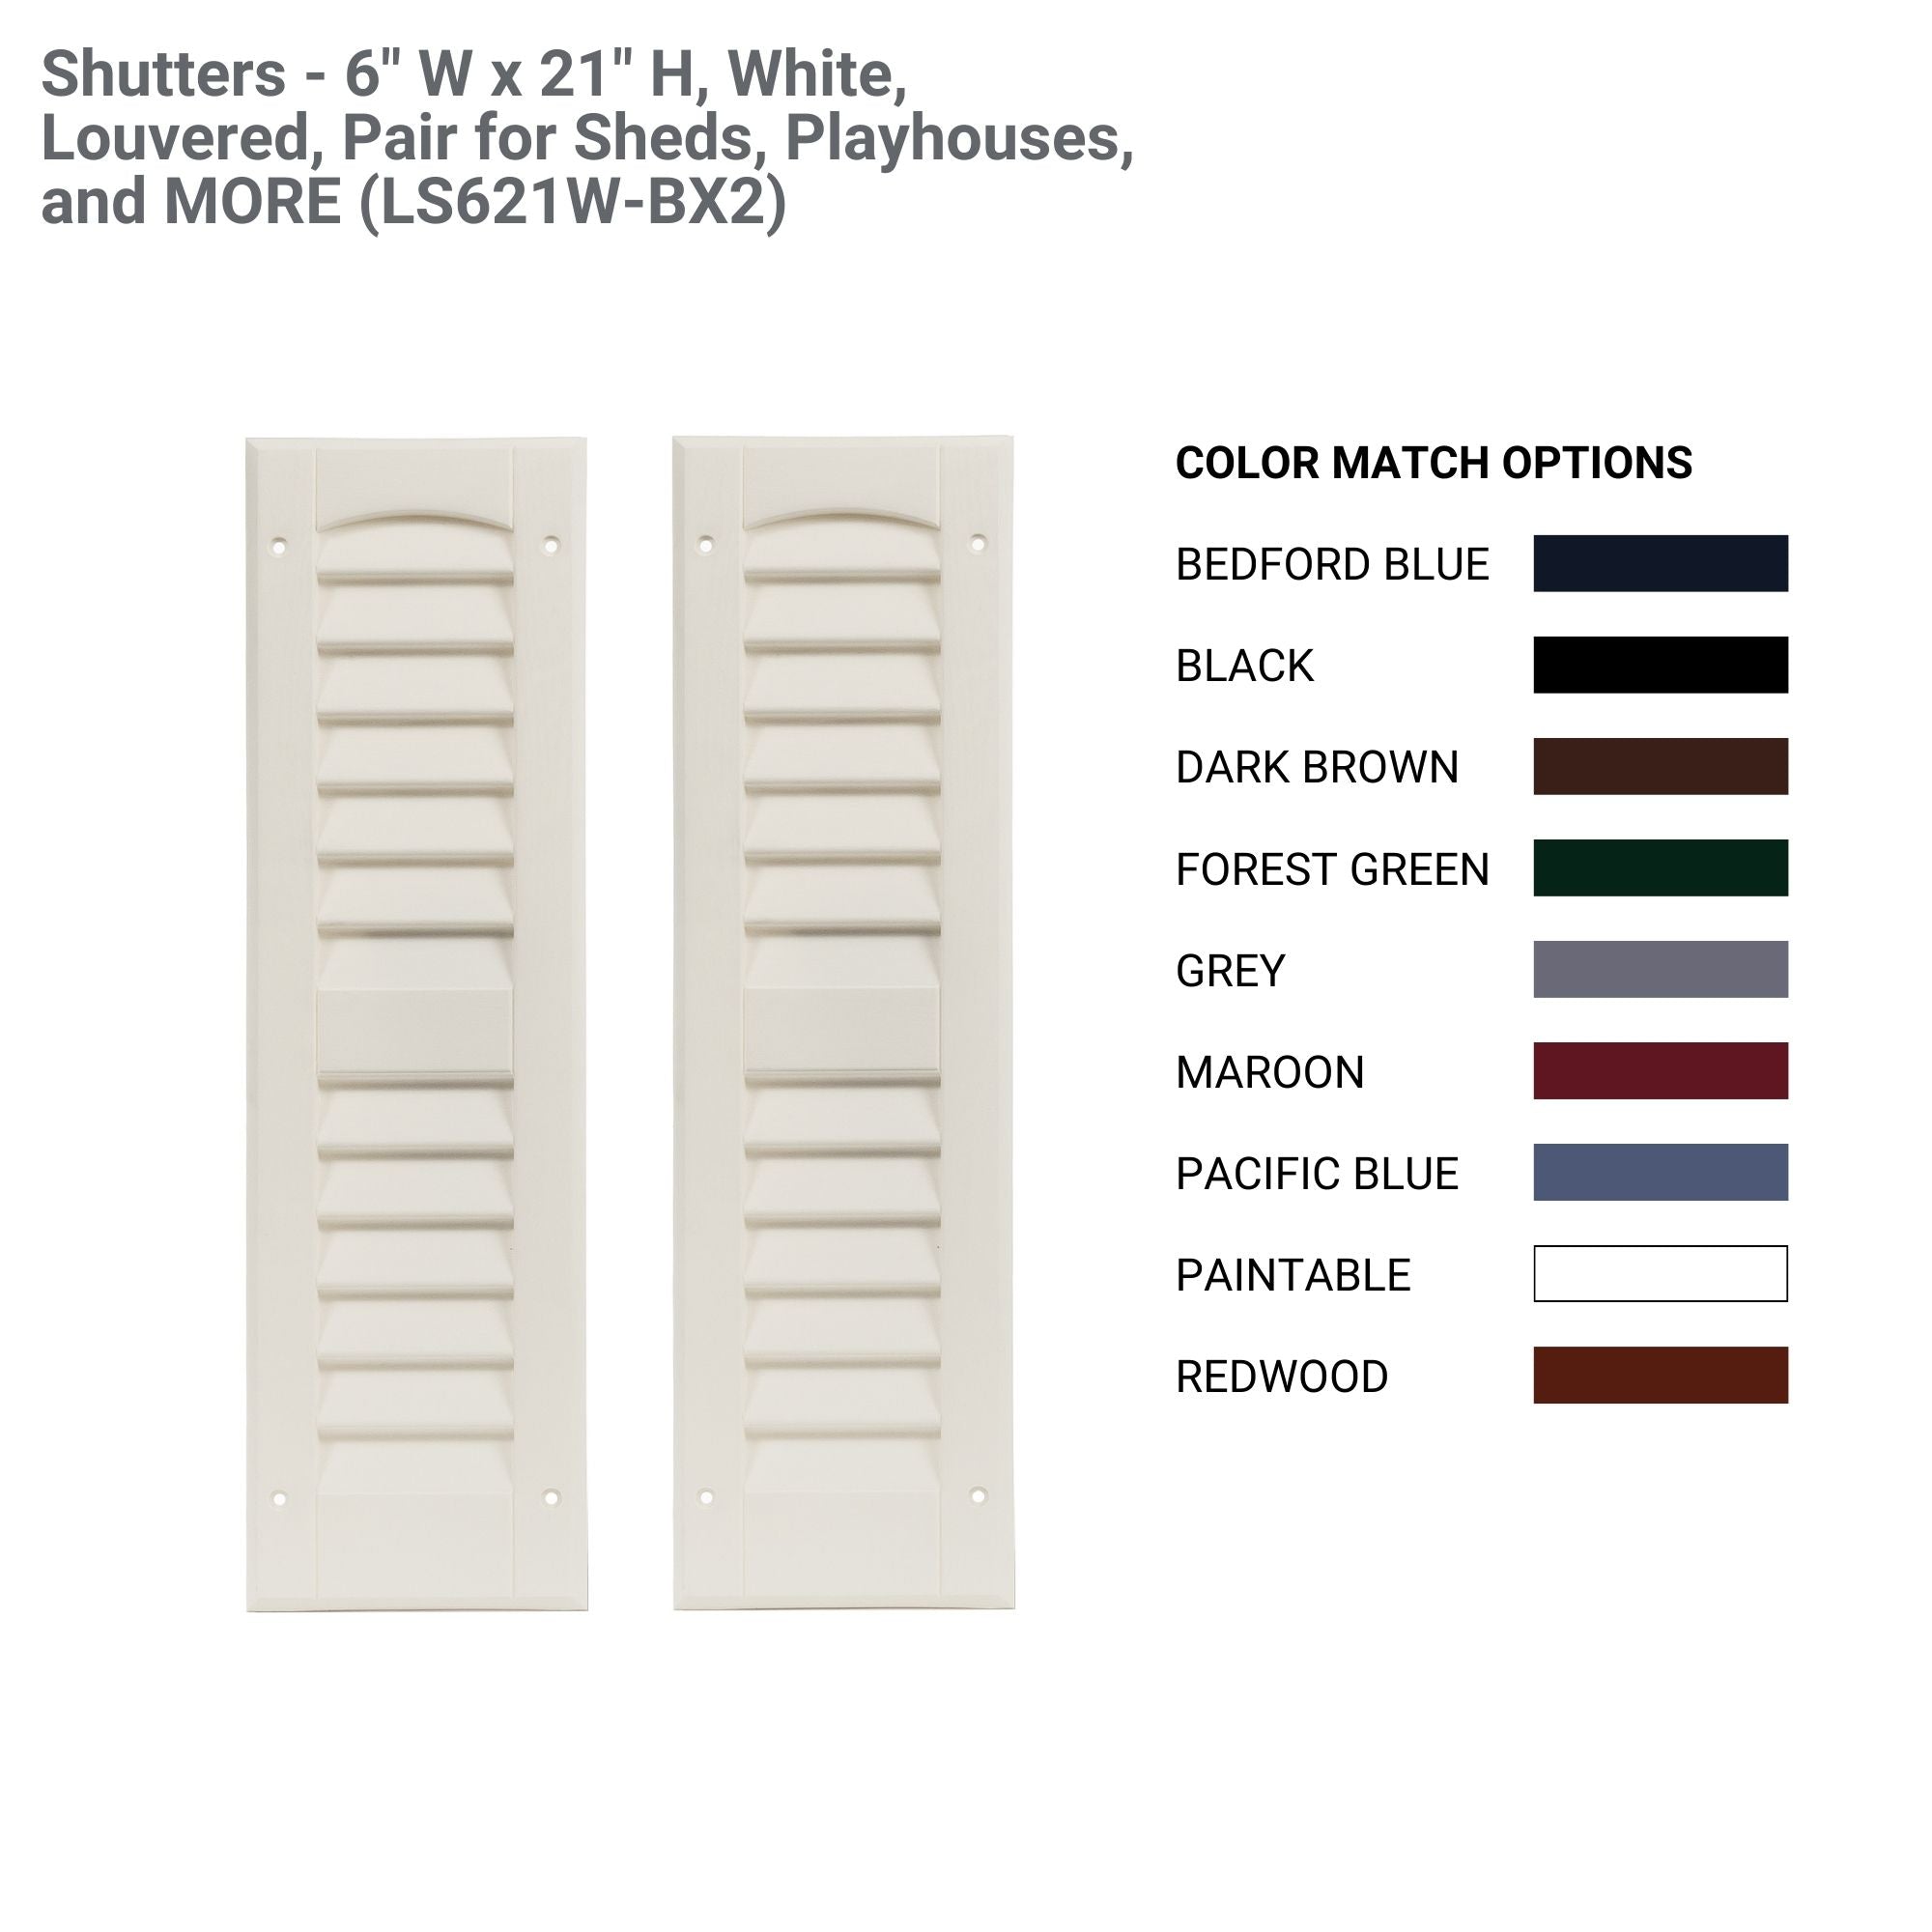 Shutters - 6" W x 21" H Louvered Shutters, 1 Pair